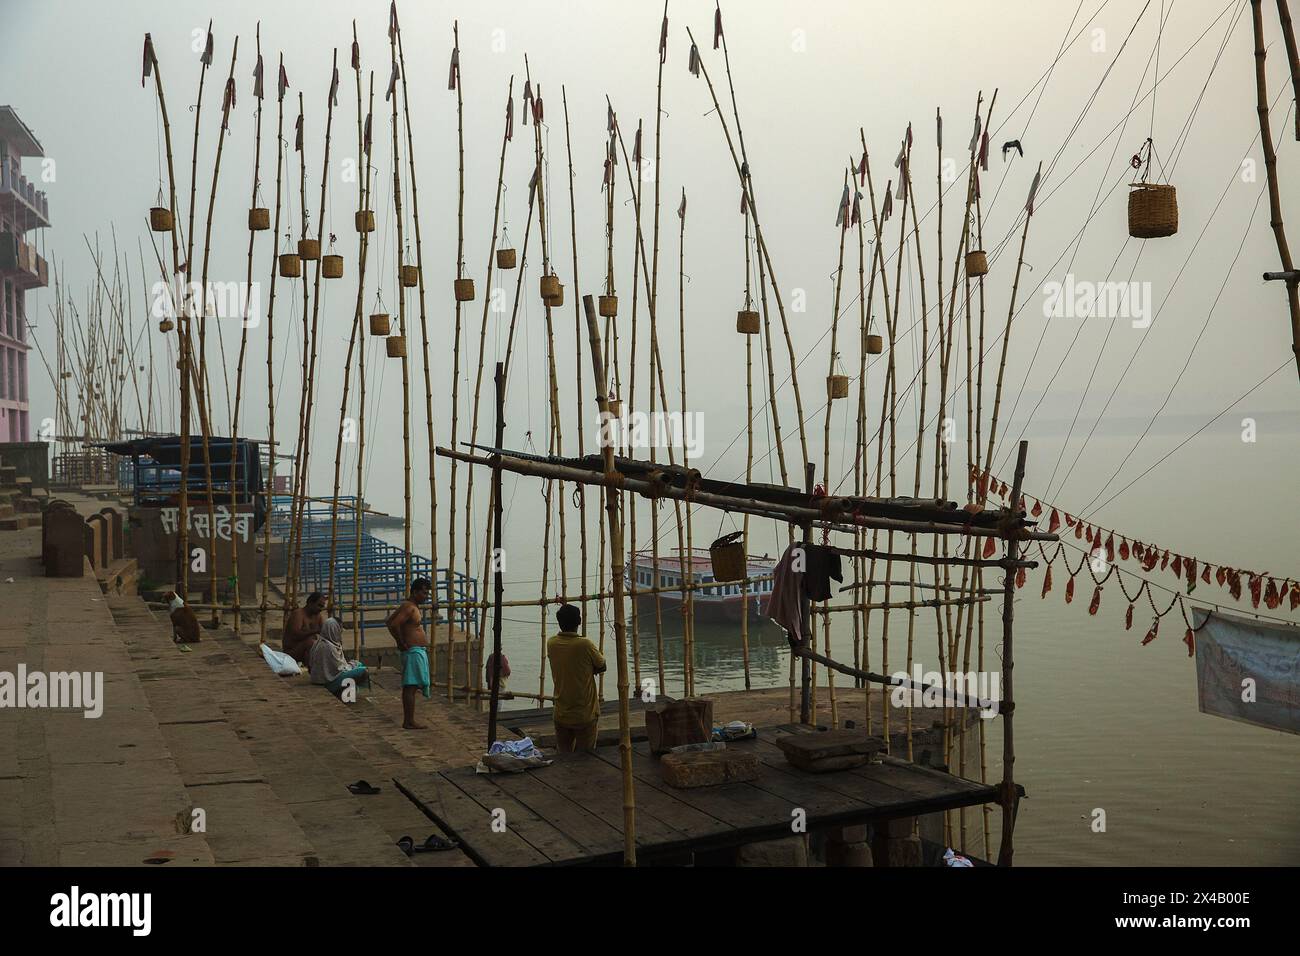 Wicker baskets hanging on long bamboo poles on the bank of the Ganges River at Varanasi, India. Stock Photo